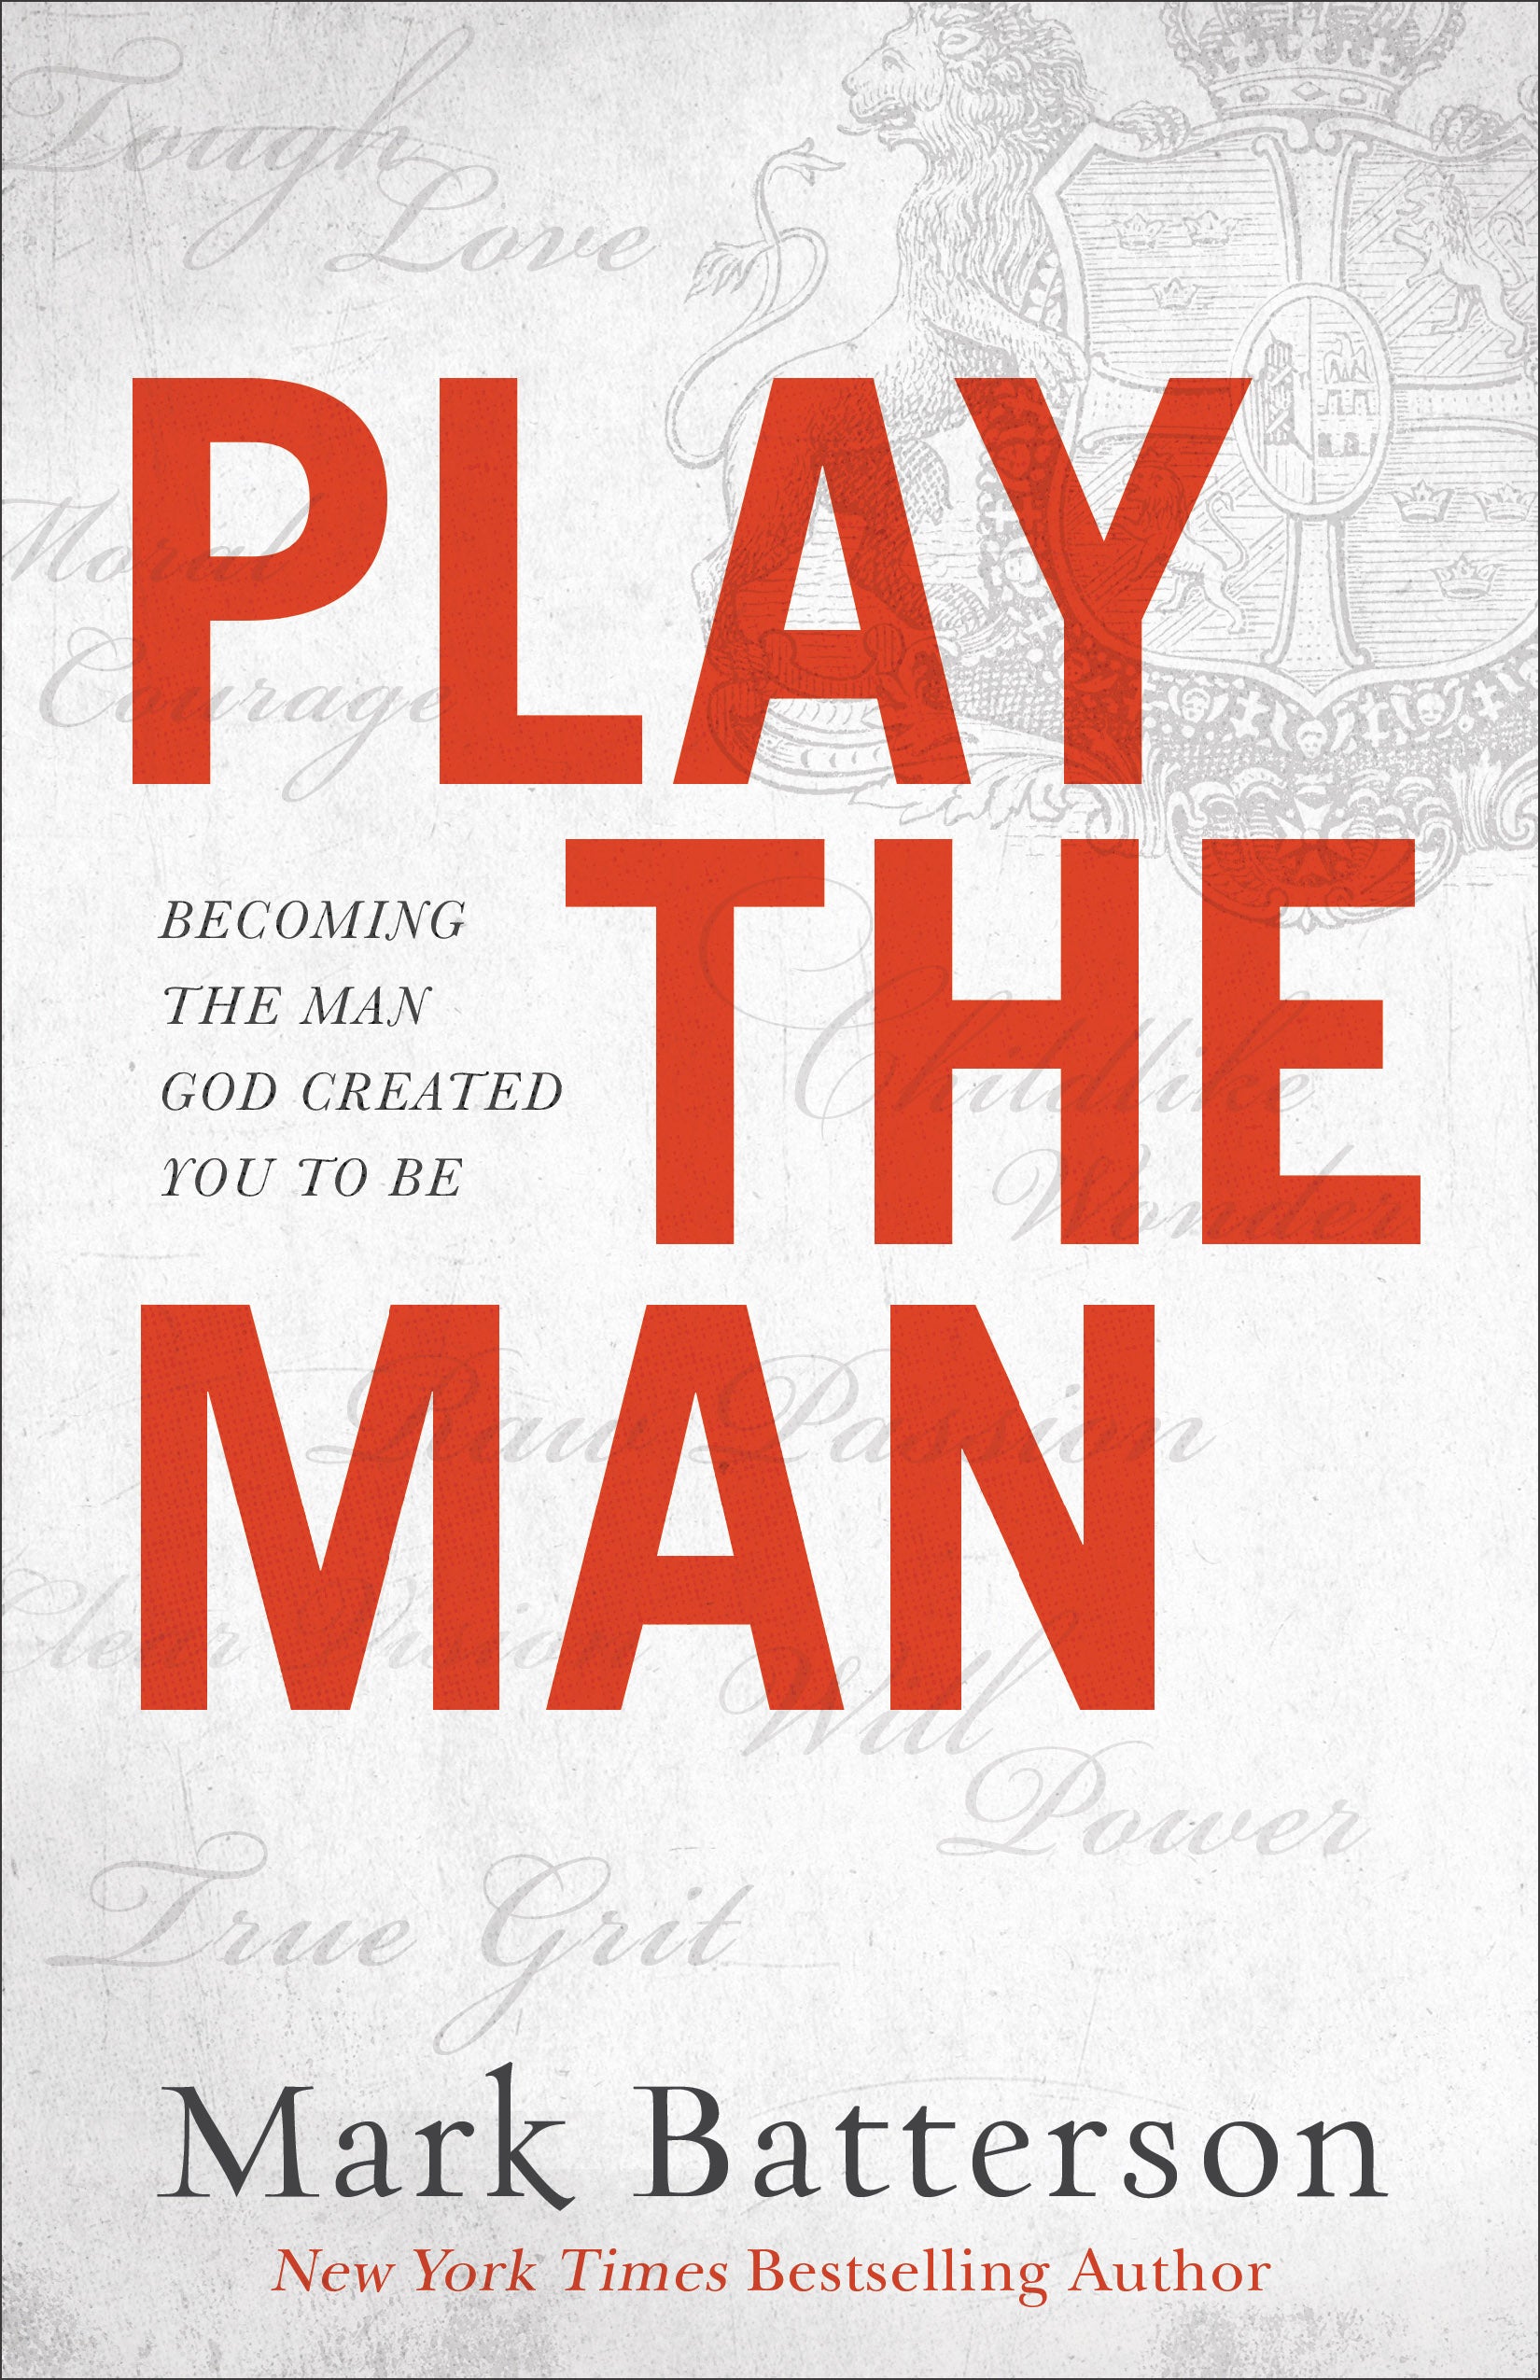 Image of Play the Man other